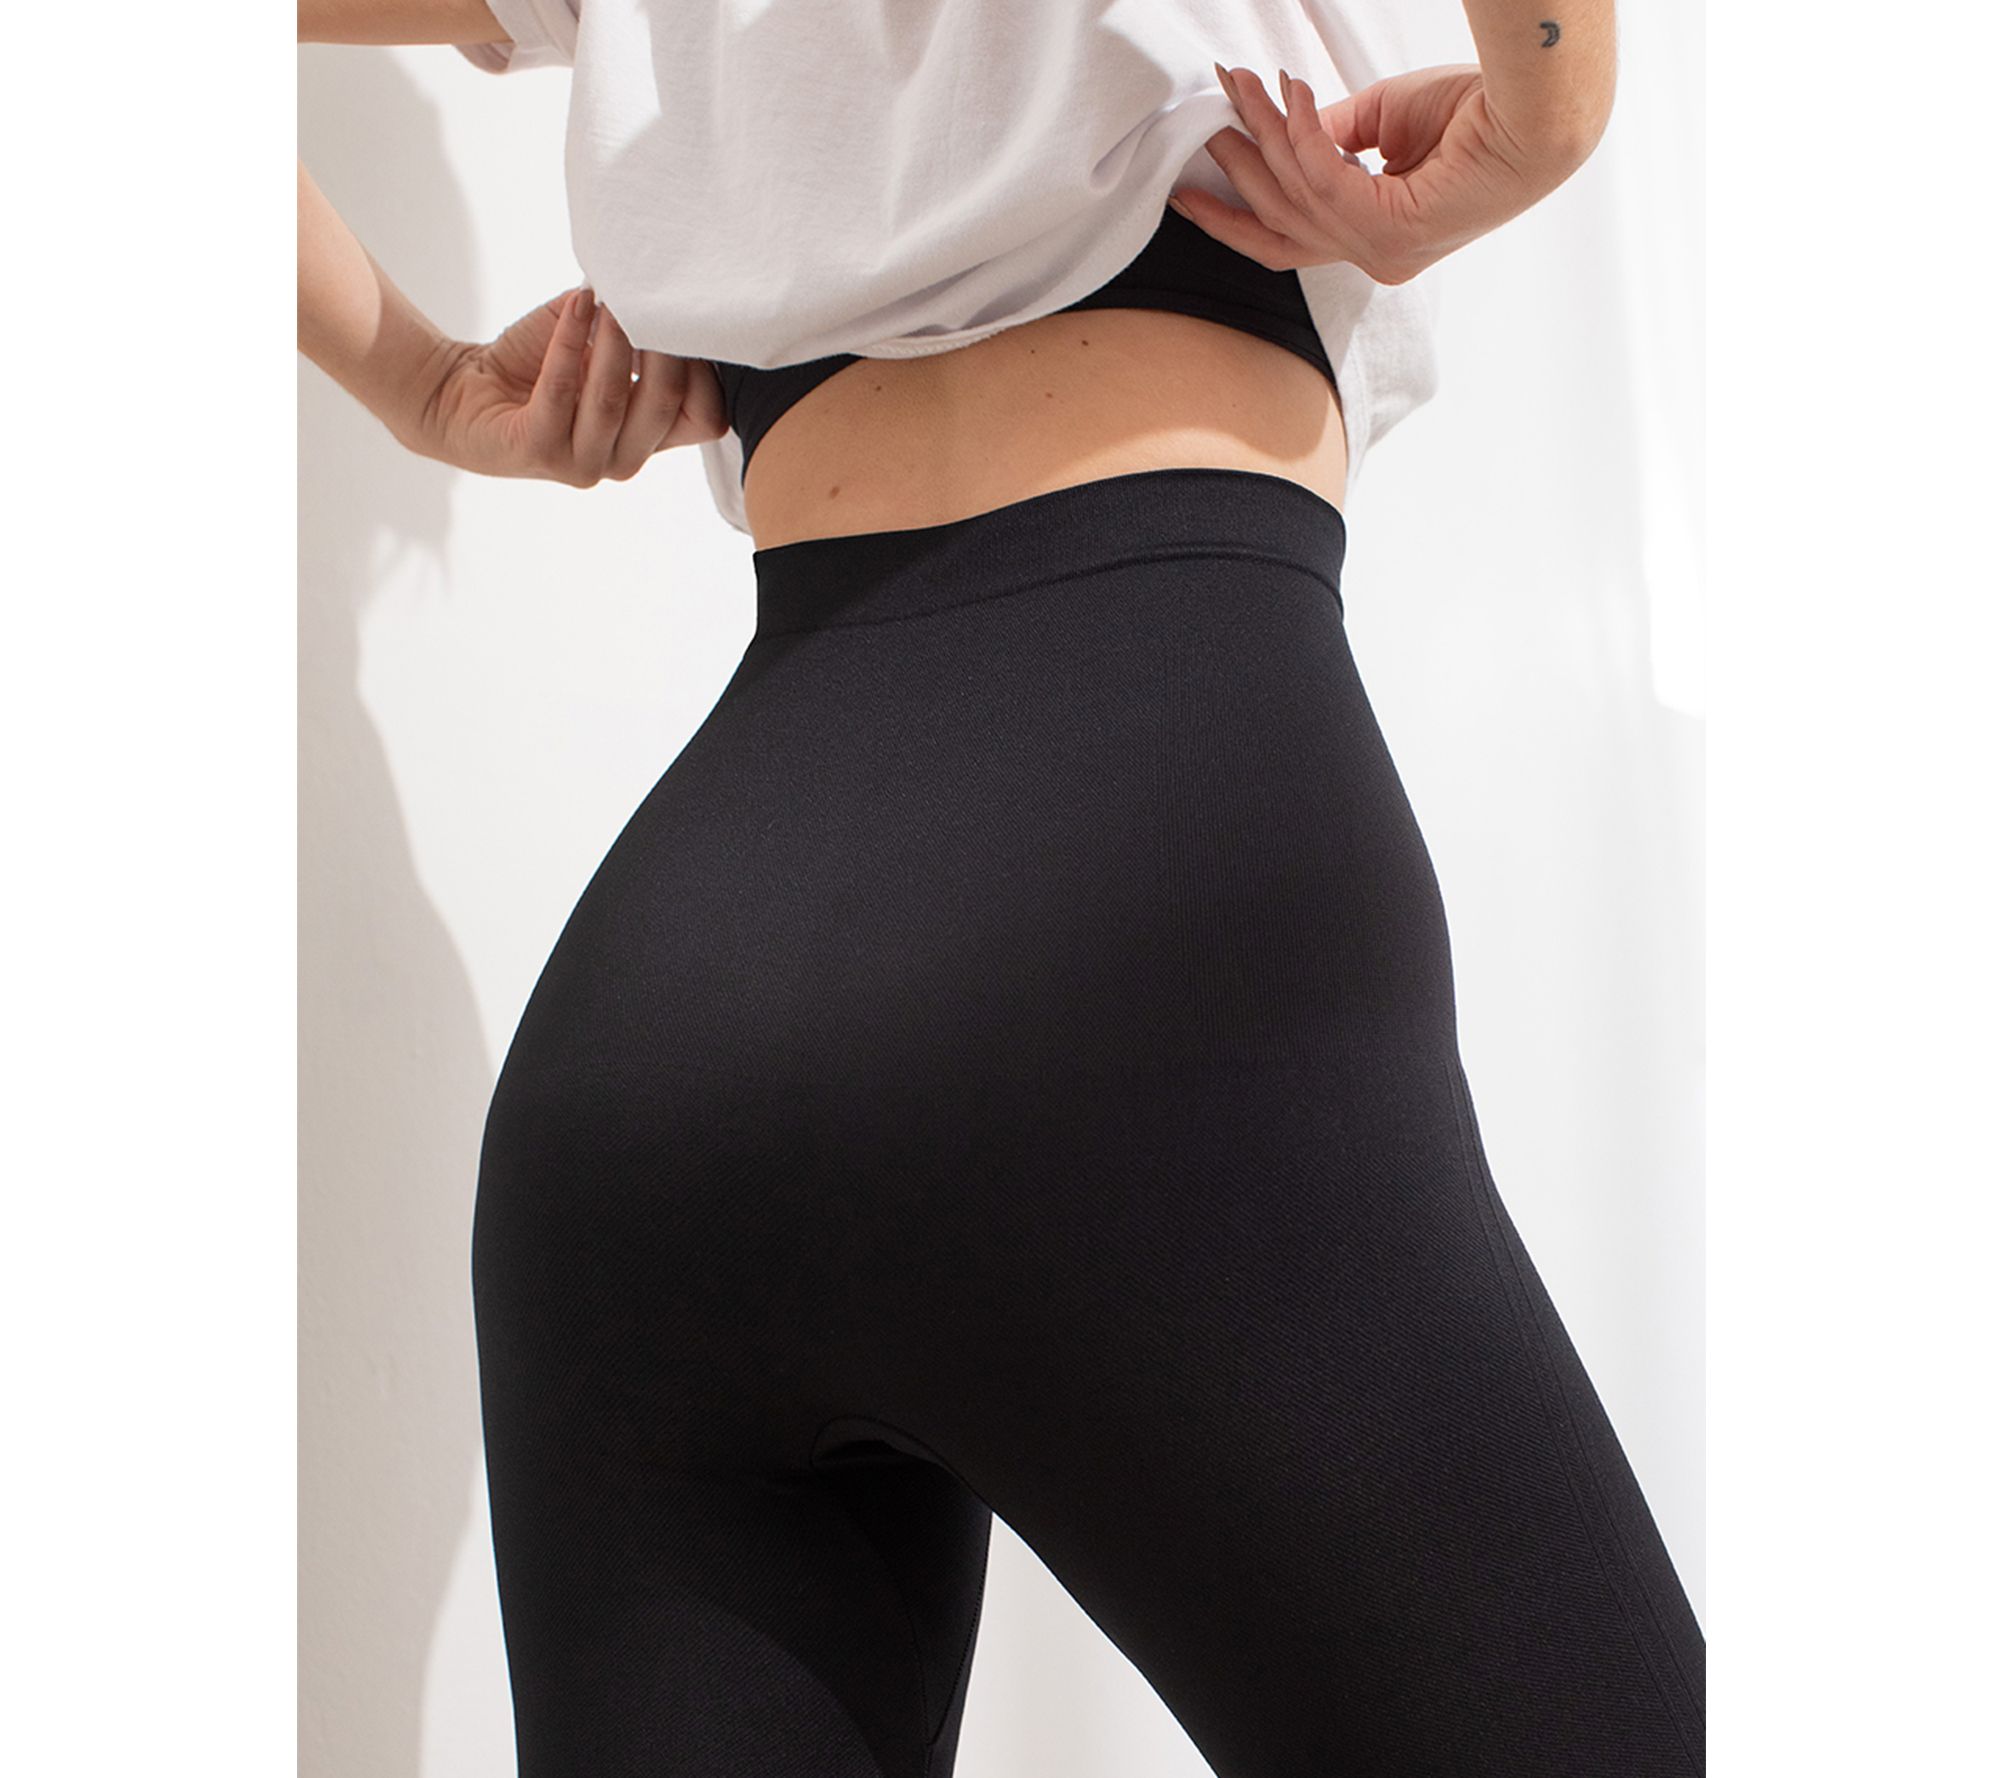  Red Hot by Spanx Shaping Leggings Black LG : Clothing